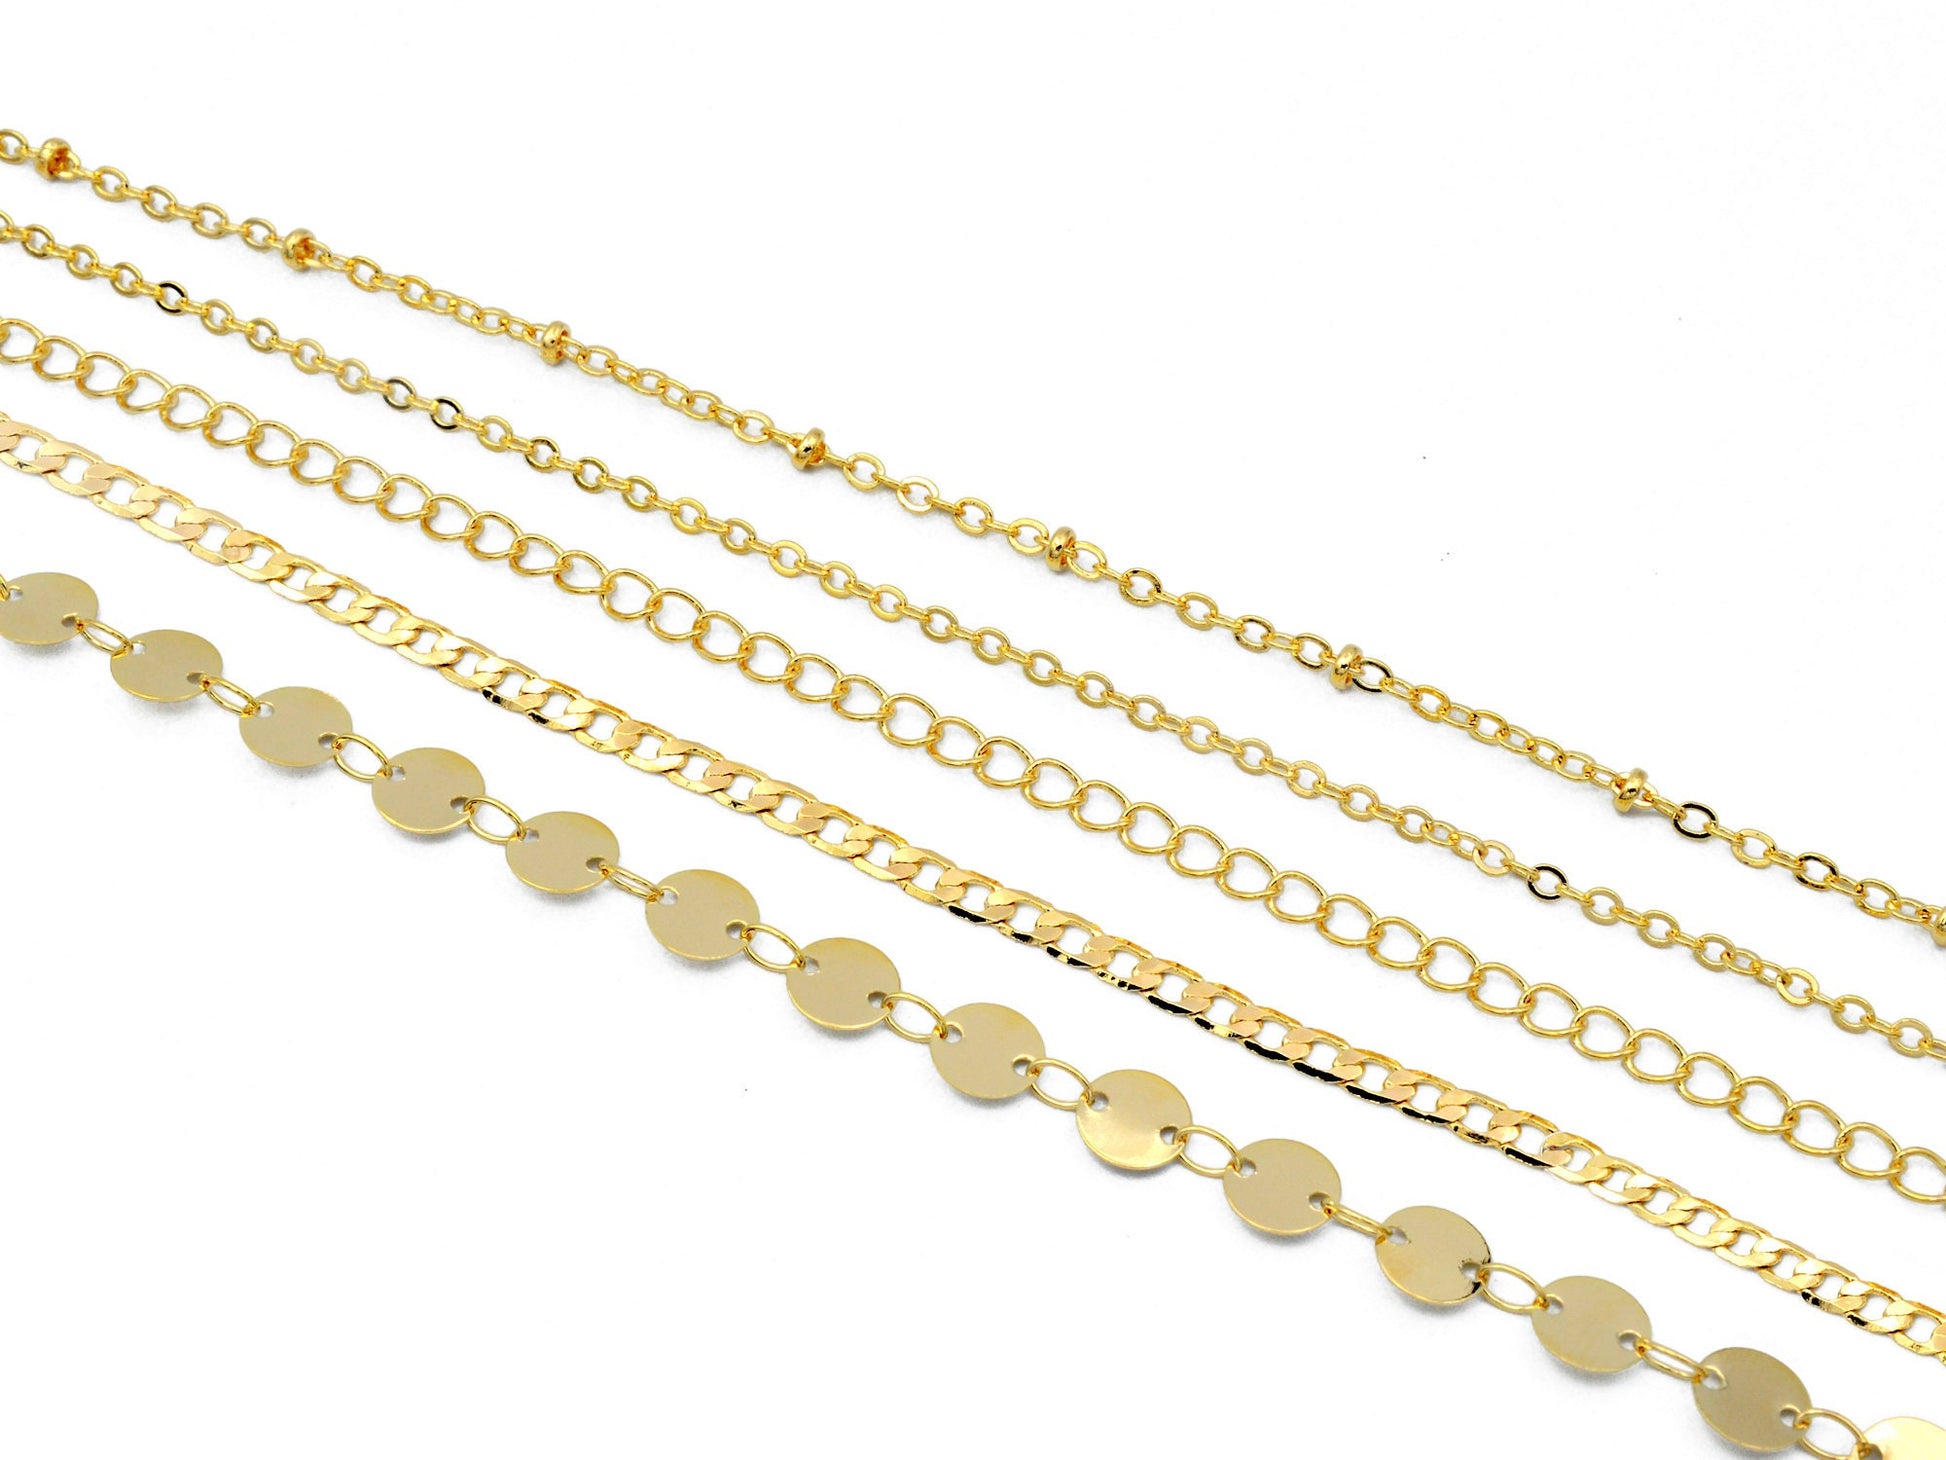 14K Gold Filled Saturn Cuban Cable Link Diamond Cut Charm Chain and Extension findings necklace for Jewelry supplies 3 ft/PK and wholesale - BeadsFindingDepot